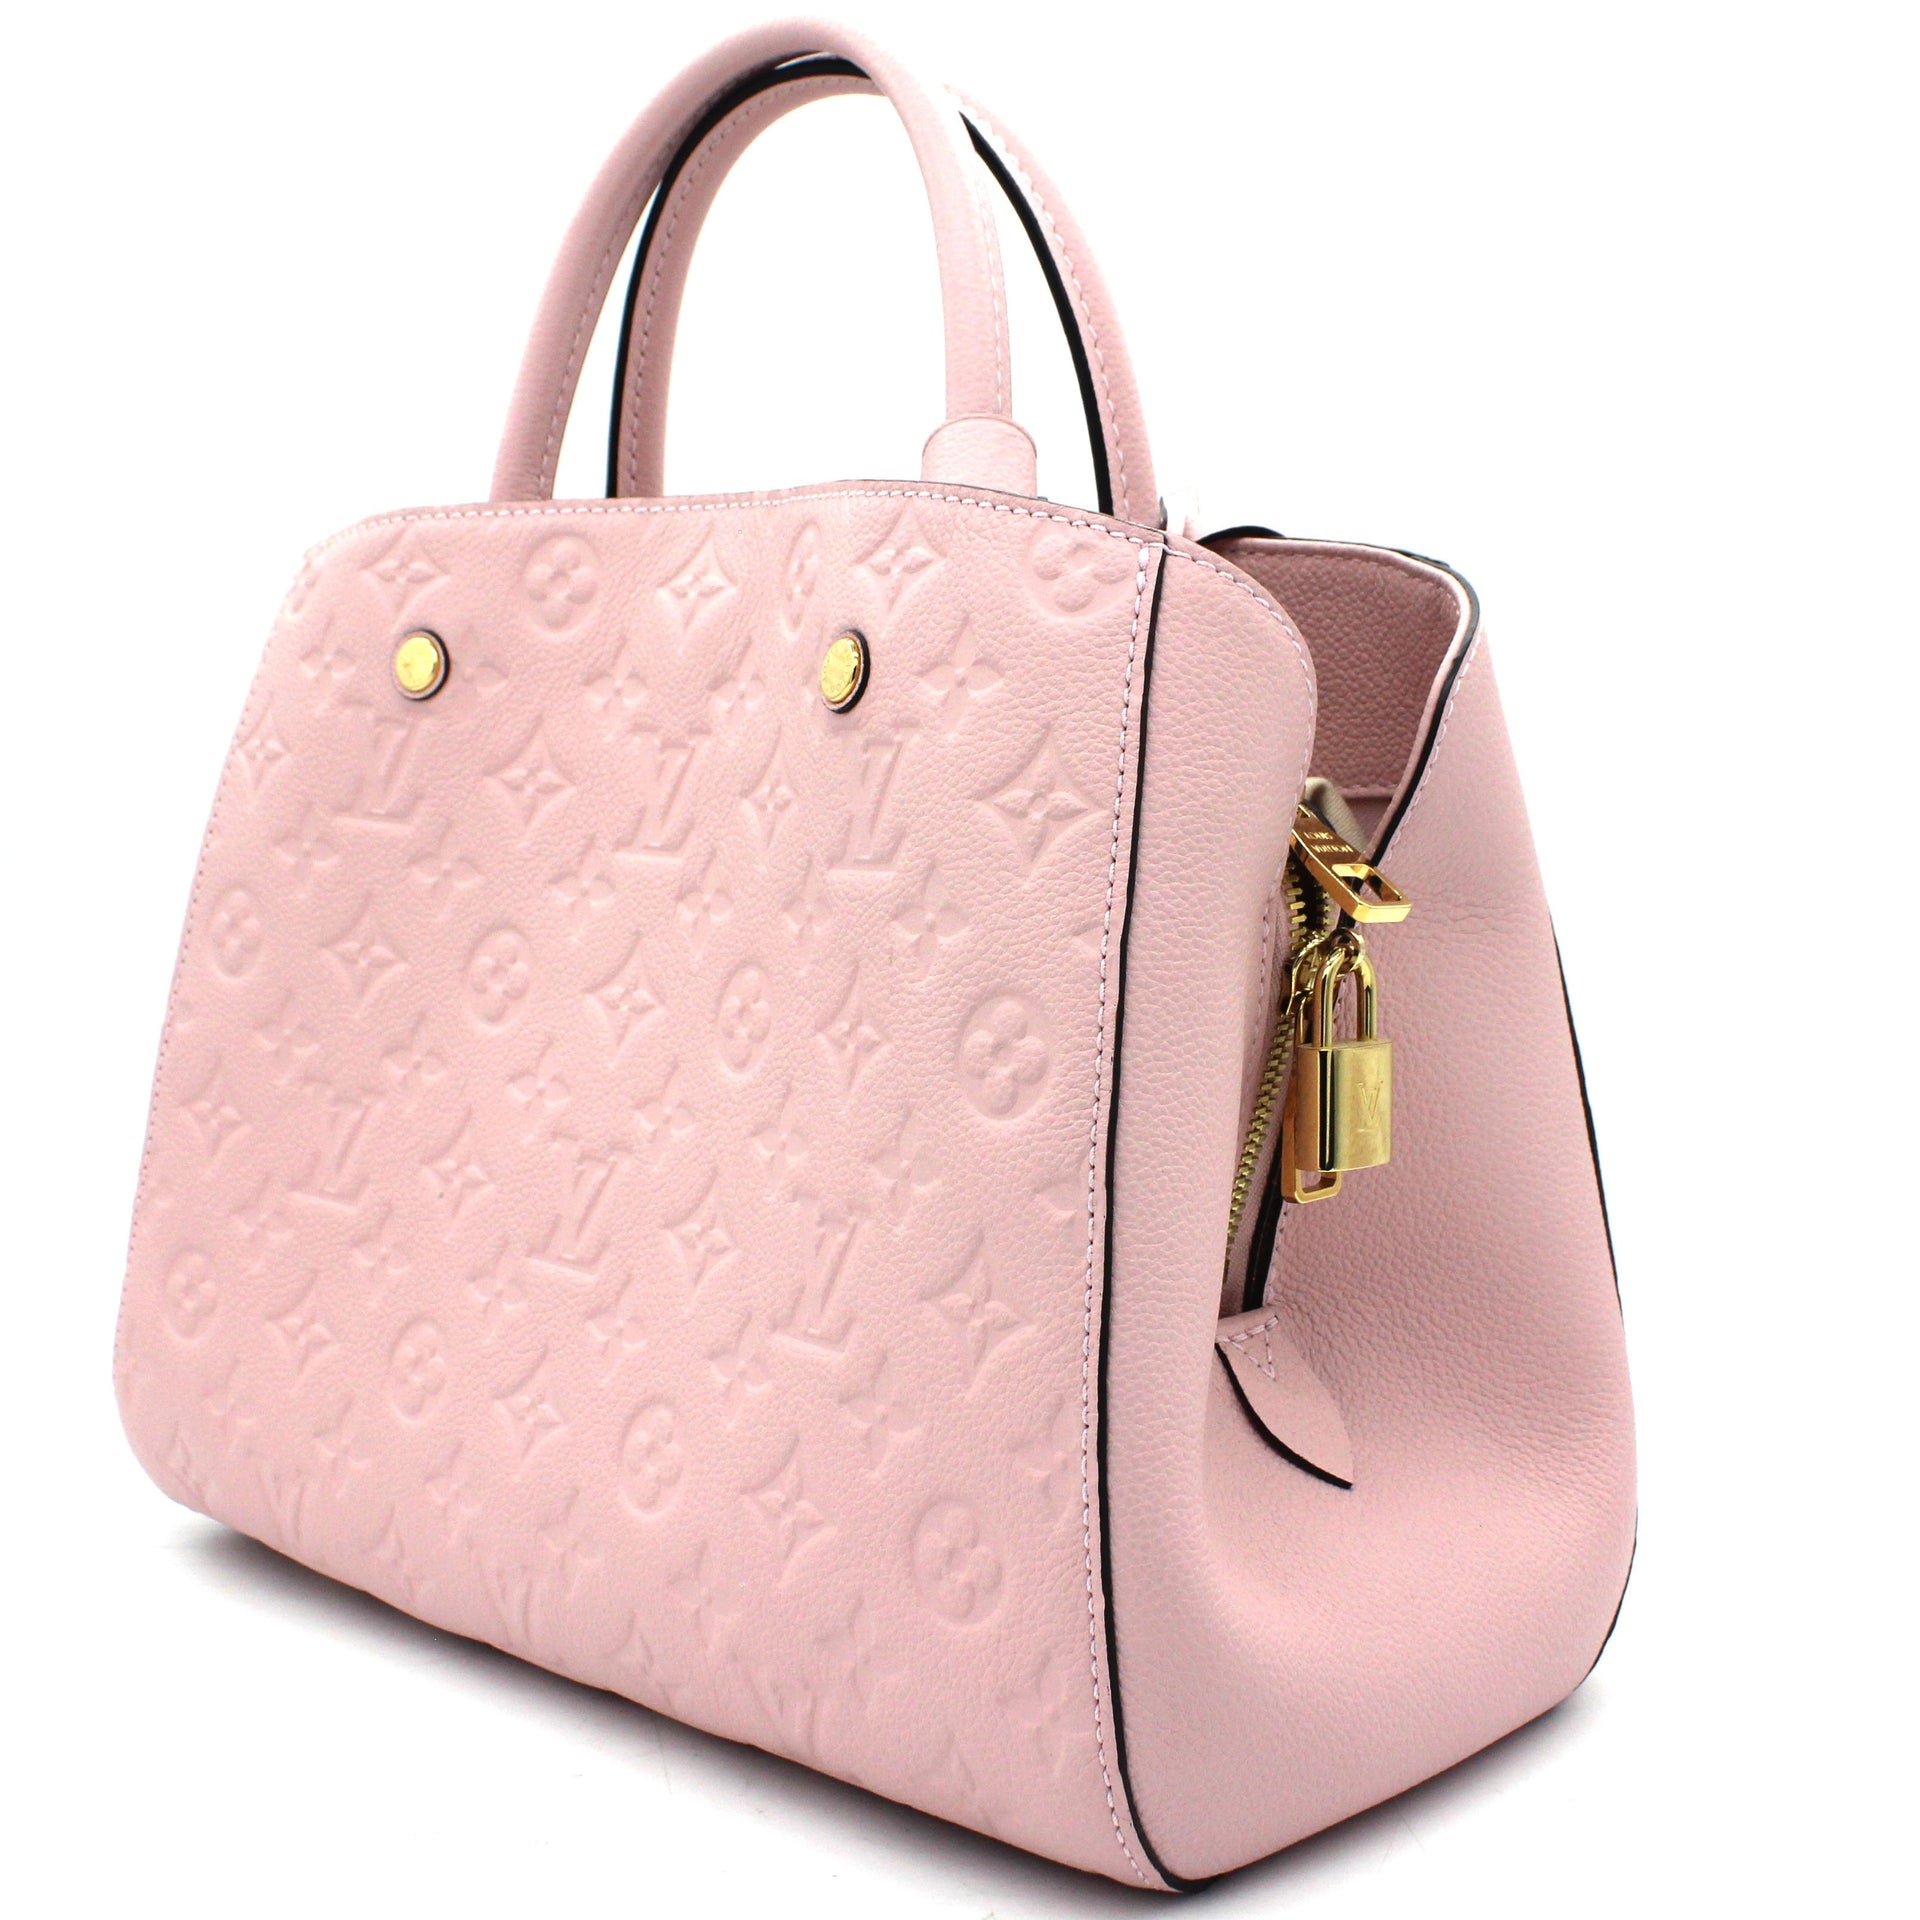 Montaigne leather handbag Louis Vuitton Pink in Leather - 21129749